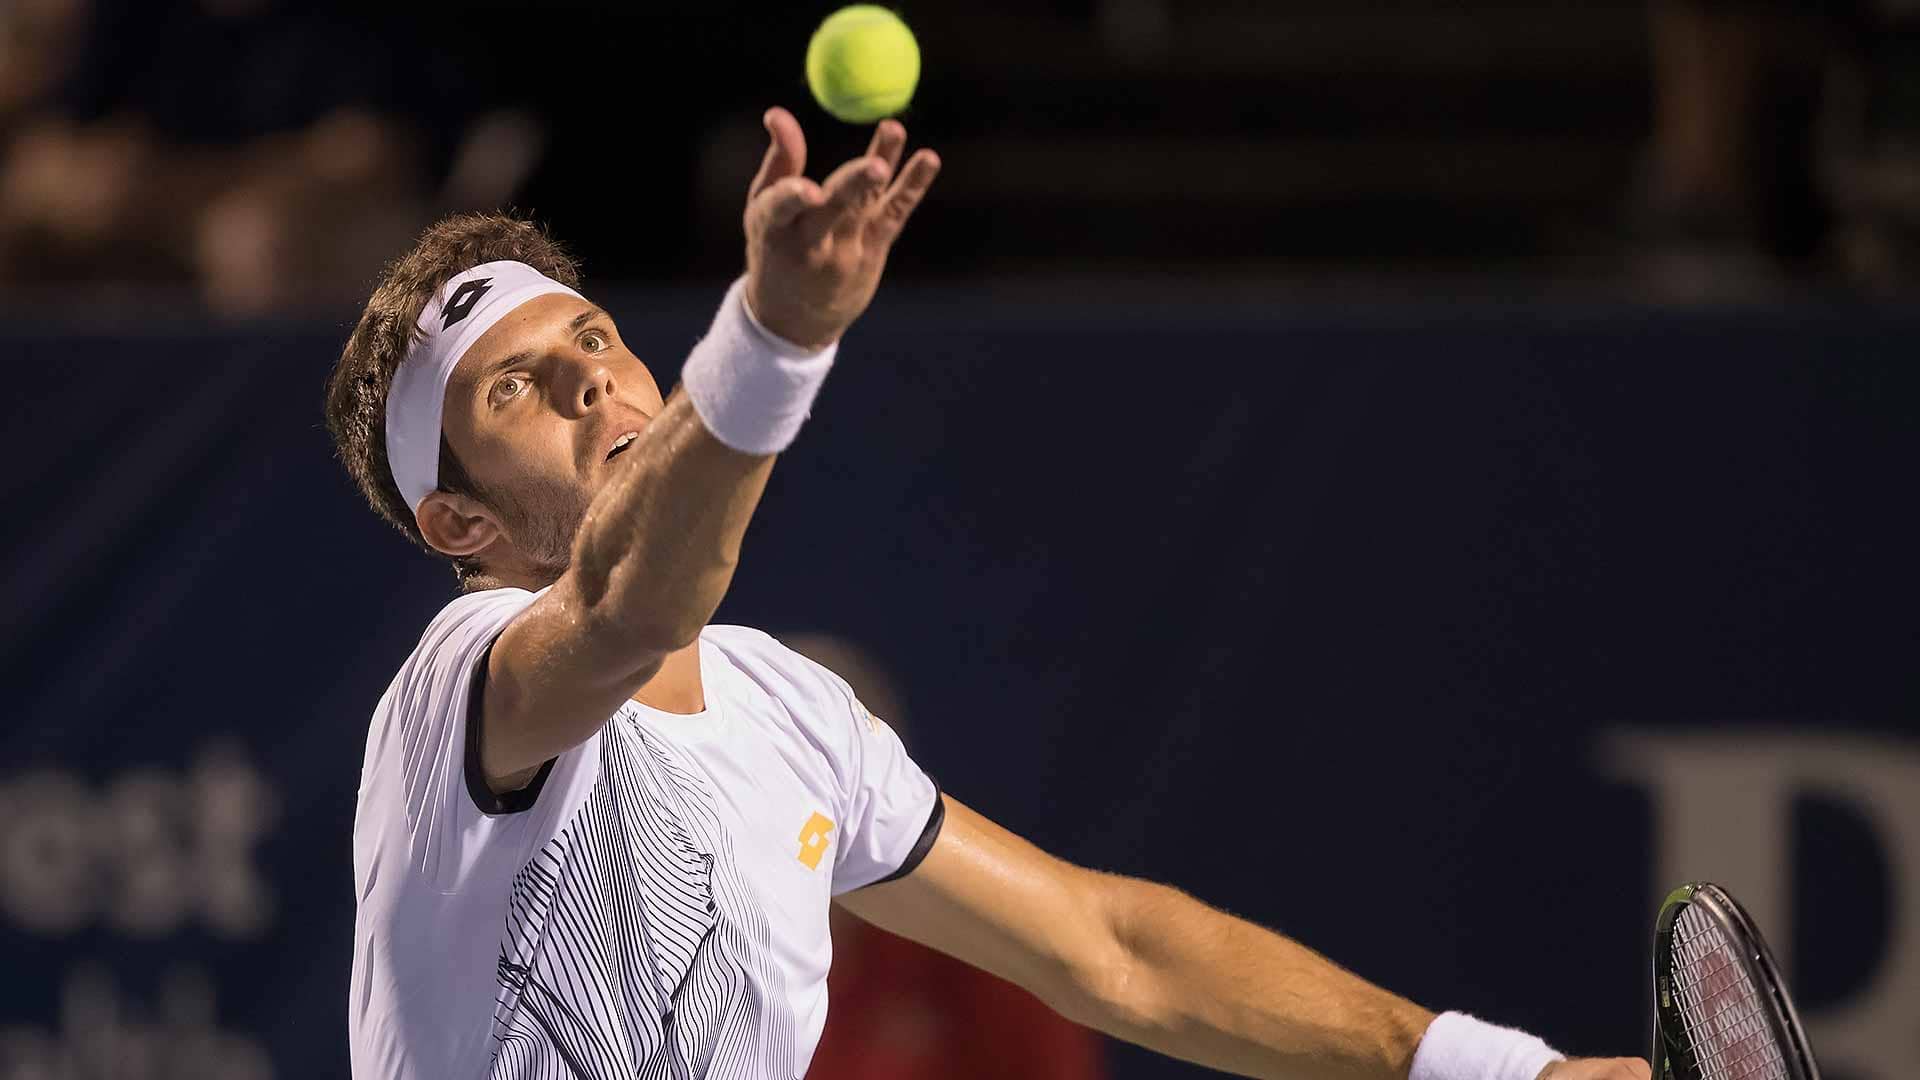 With Focused Plan, Czech Jiri Vesely Breaks Through Against Djokovic, Other Top 10 ATP Tour Tennis